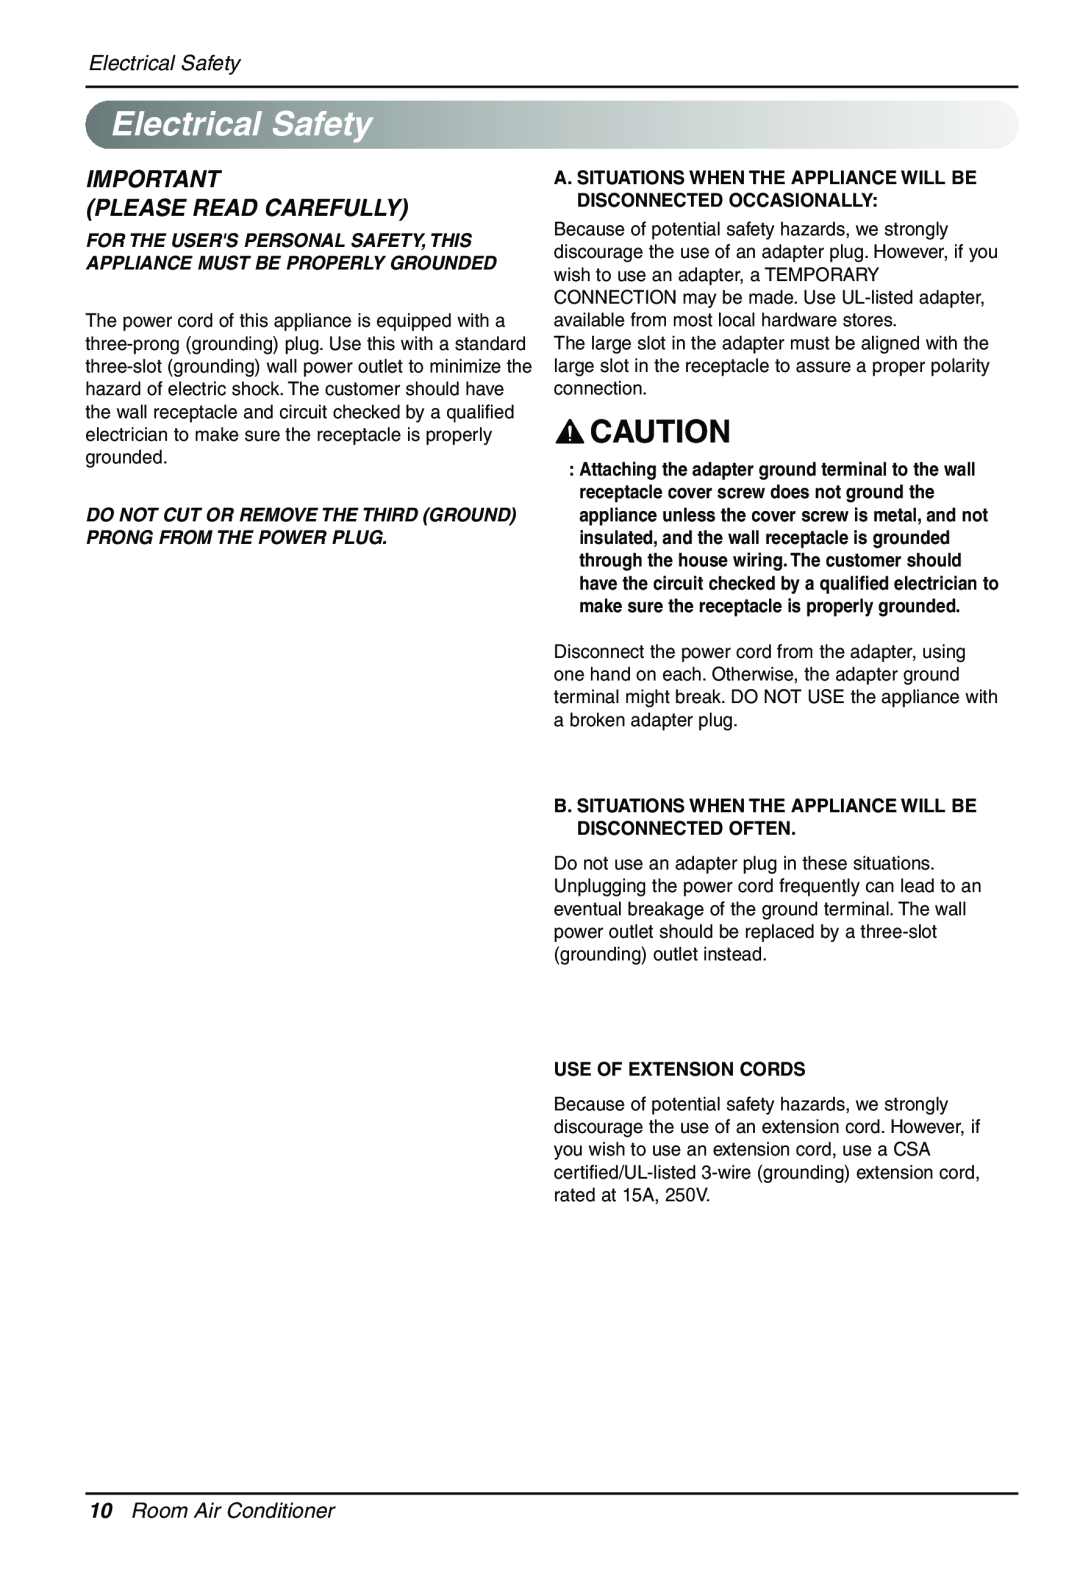 Sears LT103CNR ElectricalSafety, Please Read Carefully, Electrical Safety, Room Air Conditioner, Use Of Extension Cords 